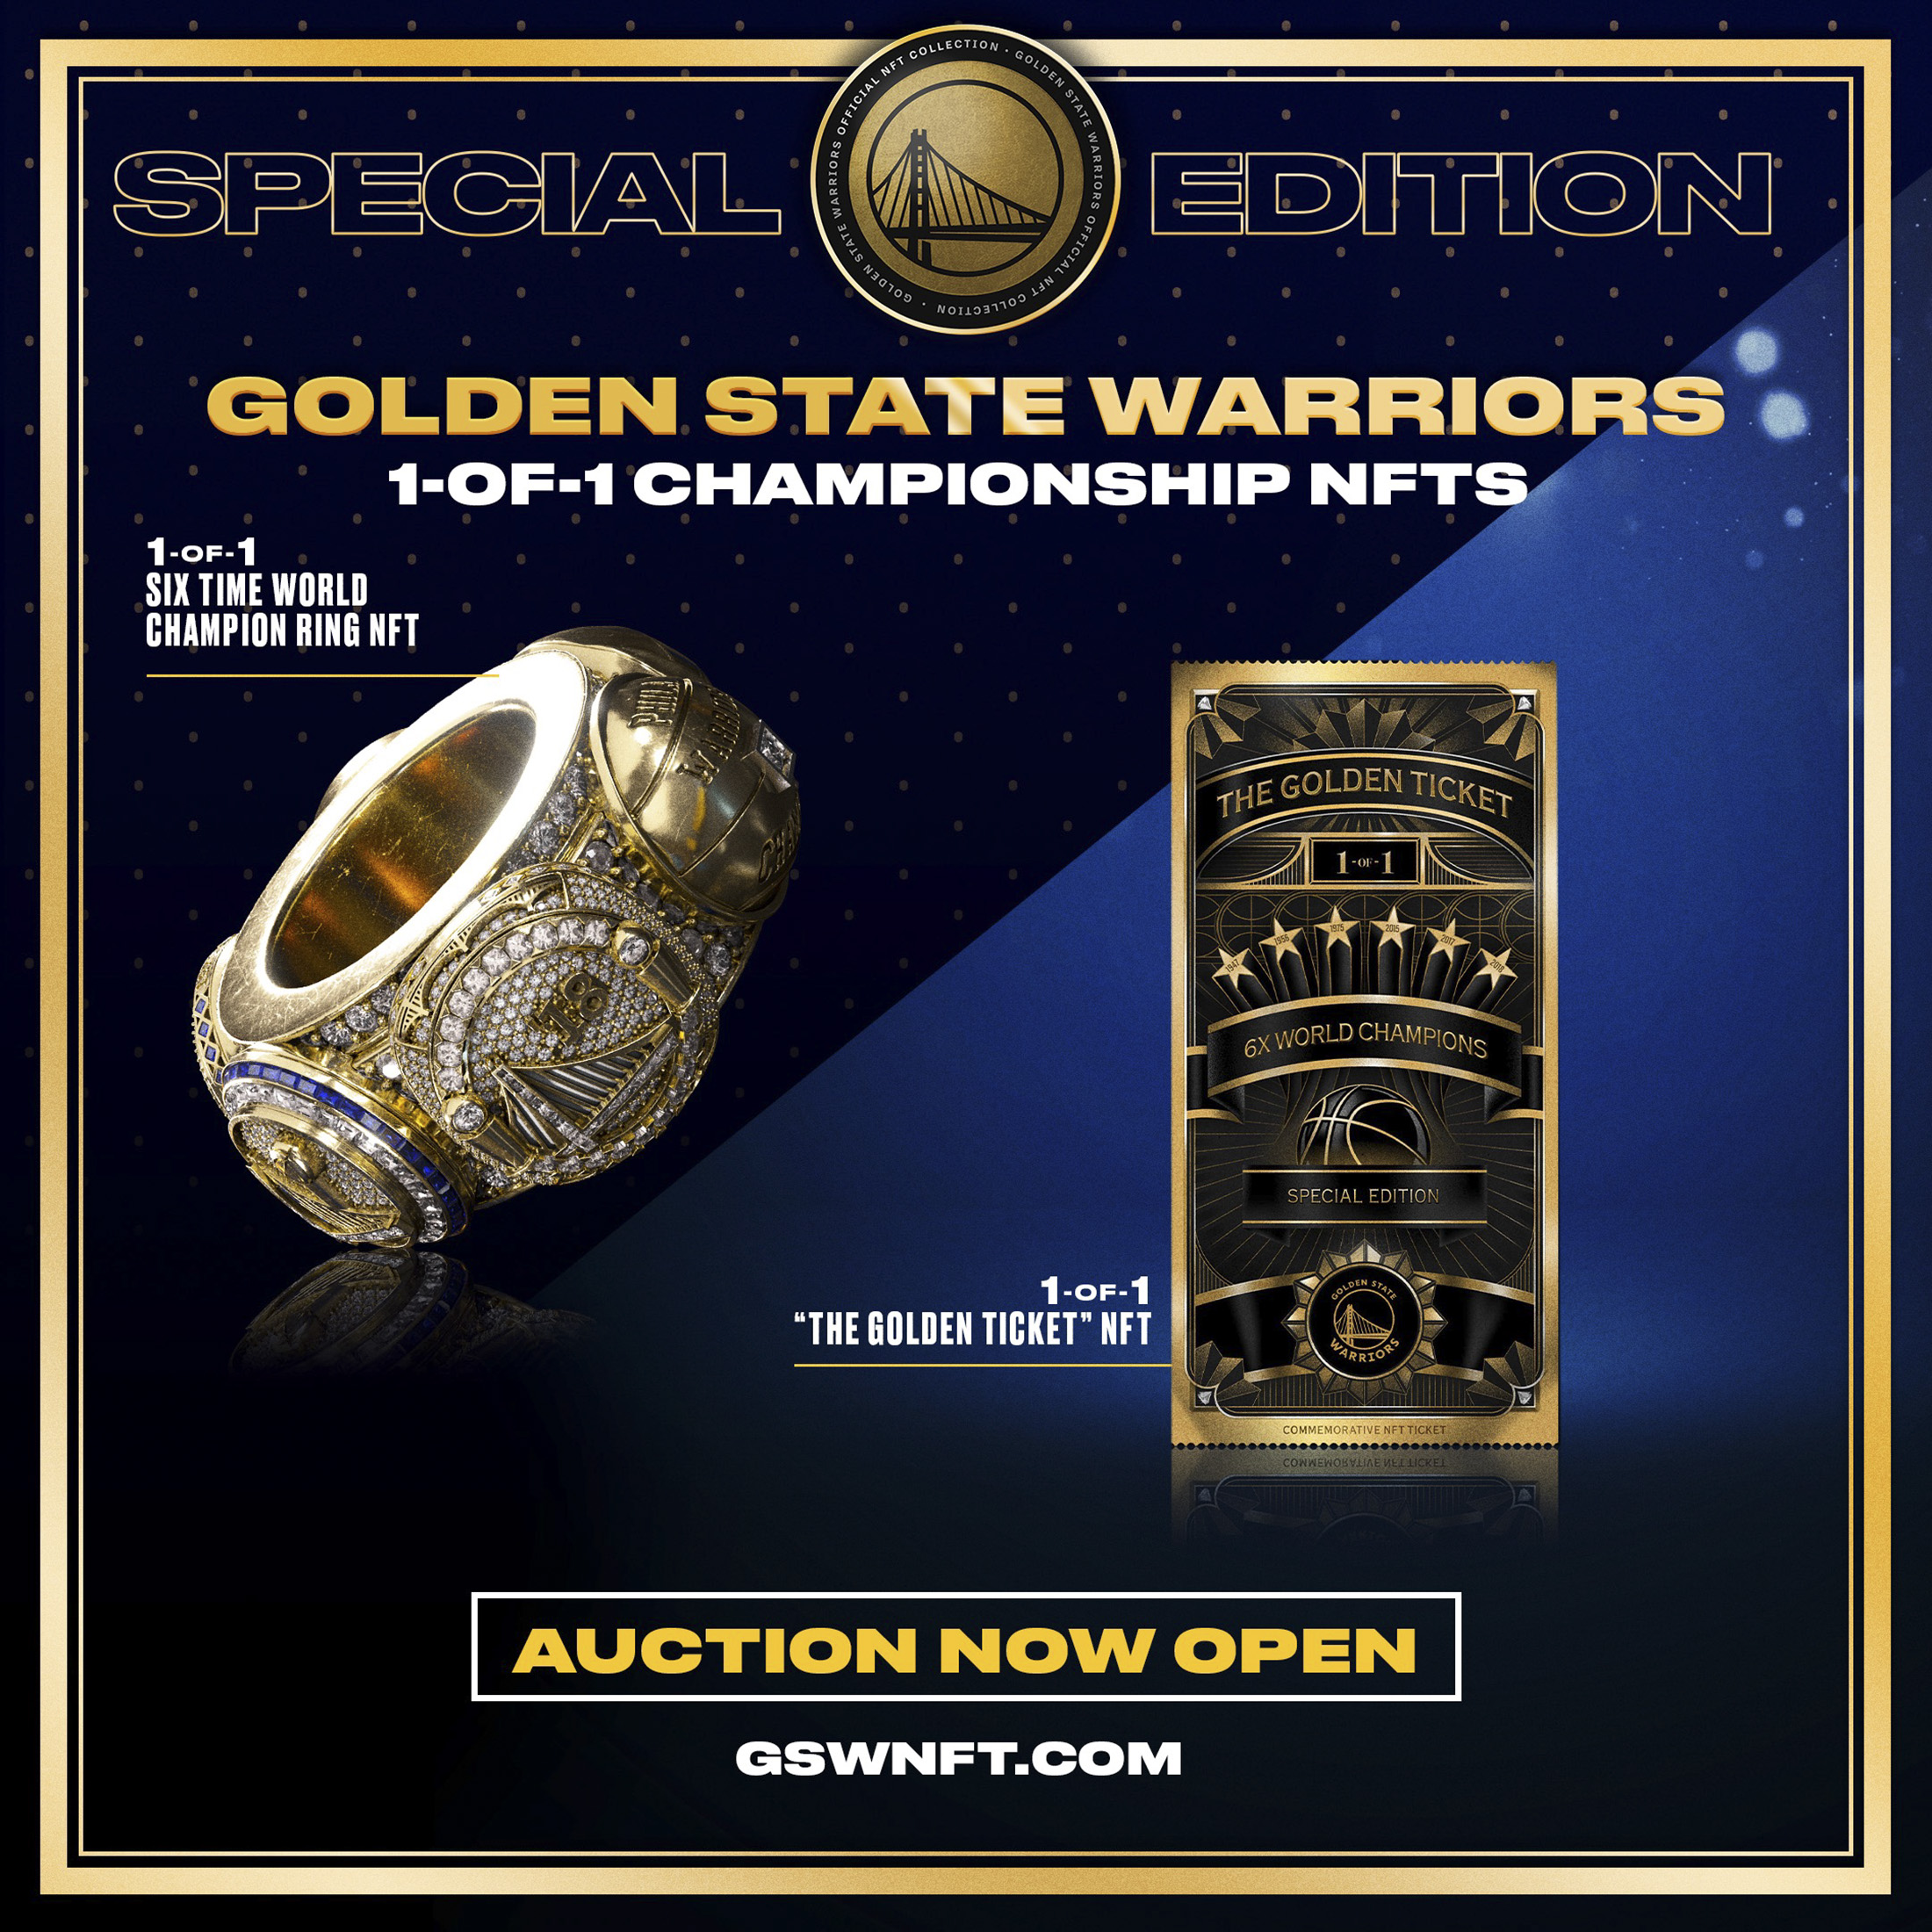 The Golden State Warriors’ championship ring NFT and commemorative ticket stub NFT.